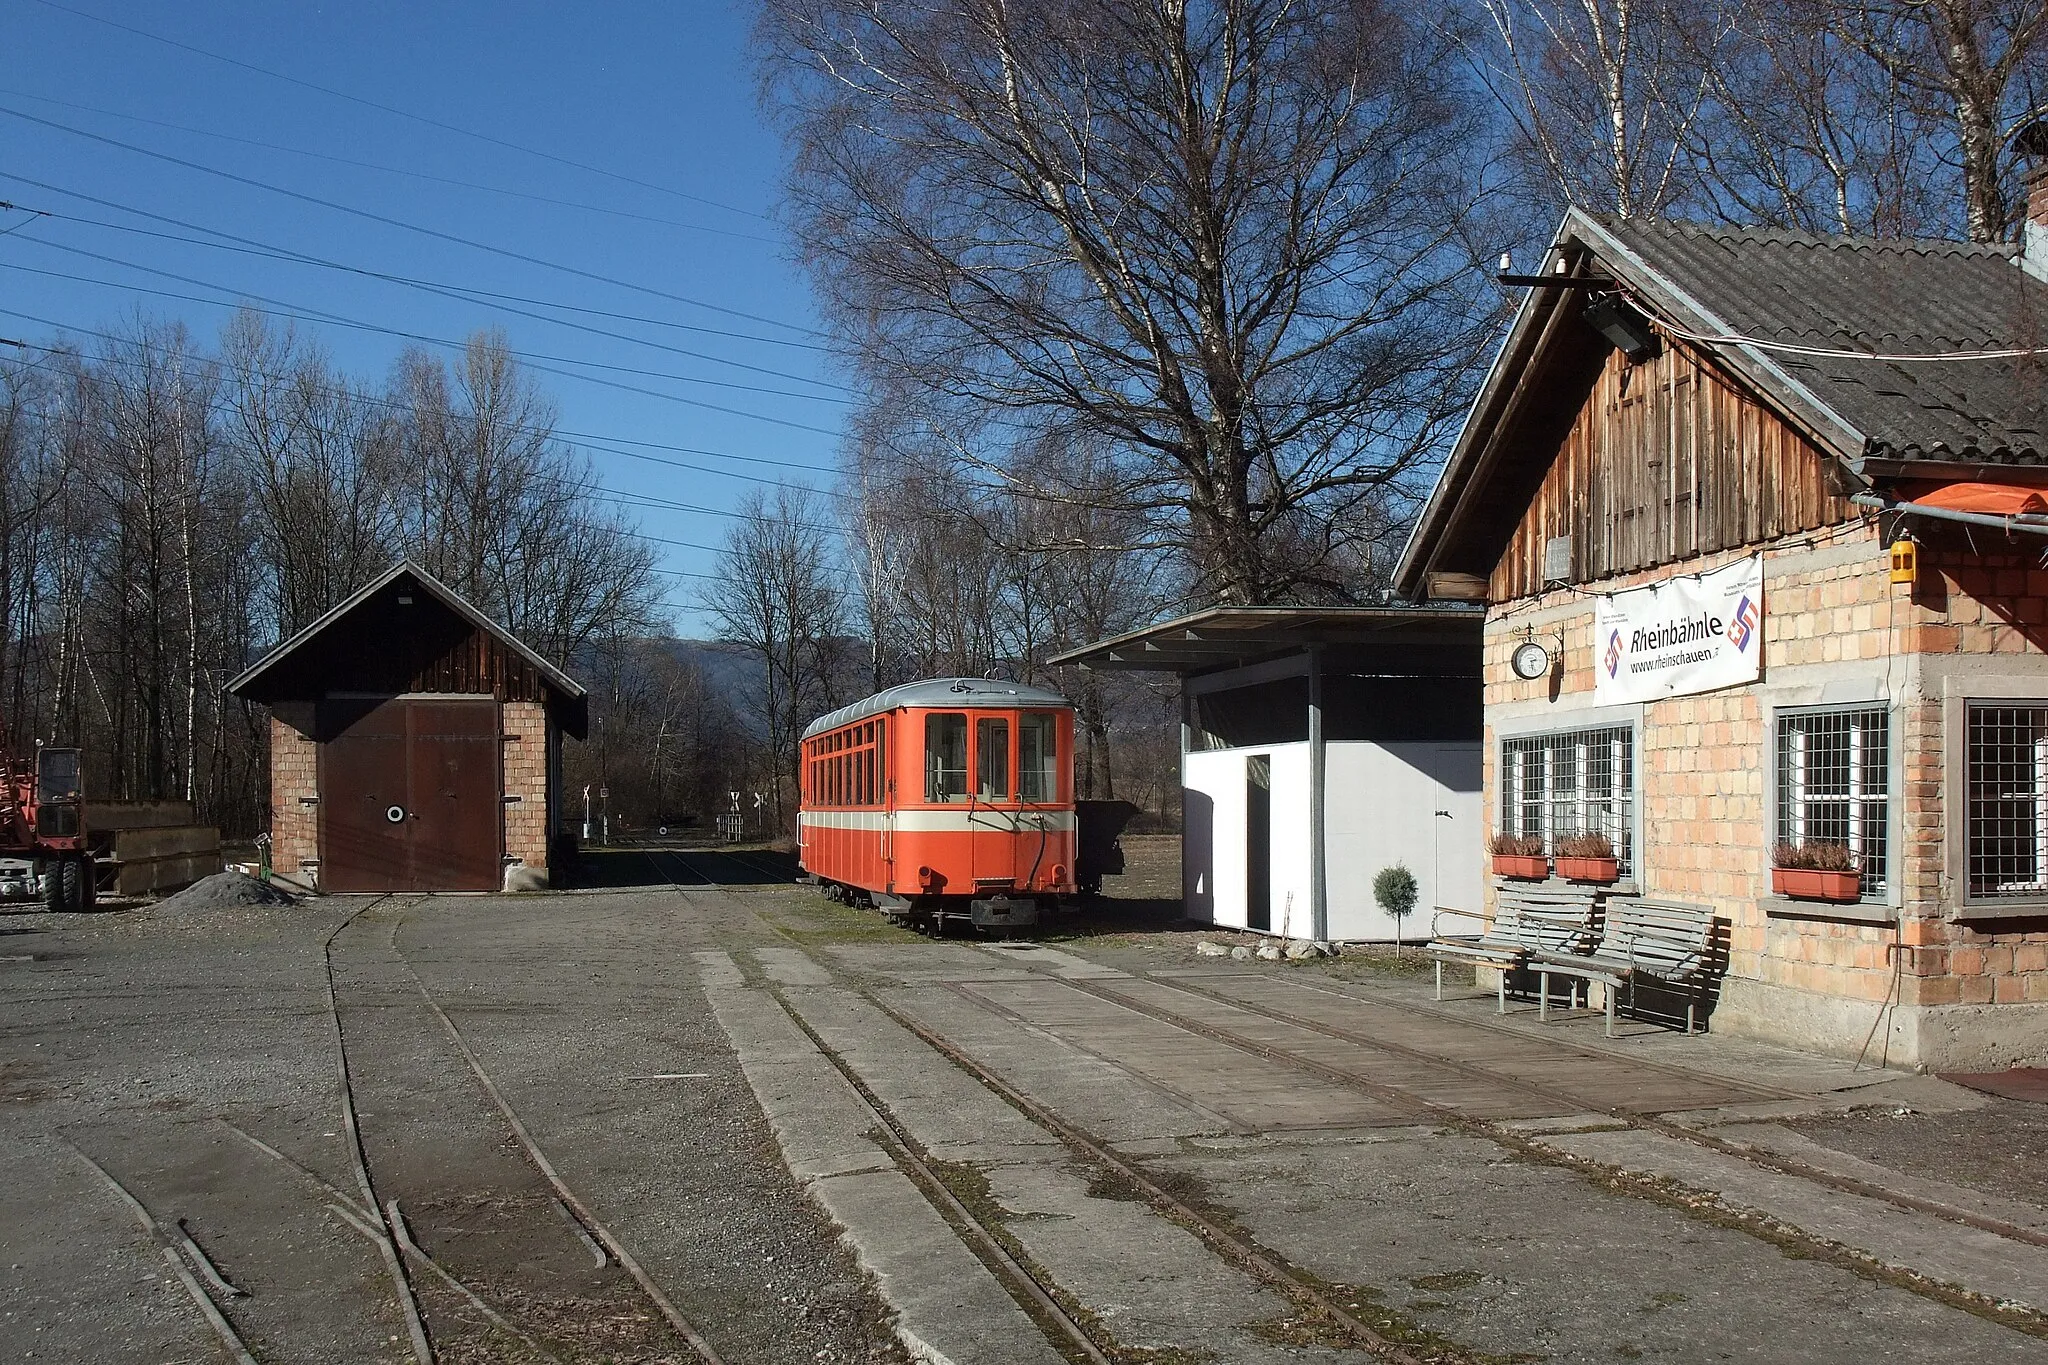 Photo showing: On 26 October 2011, the last trip was made with tourists by the association Rhein-Schauen over the railway bridge of the International Rhine Regulation (IRR) to this station at the quarry Kadelberg in Koblach. The red tram is one of three vehicles, which was acquired from the Swiss Trogen-railway in 2004 (today Appenzell Railways). The building on the left is the engine shed. Vorarlberg, Austria, Feb 23, 2014.

(14/17)